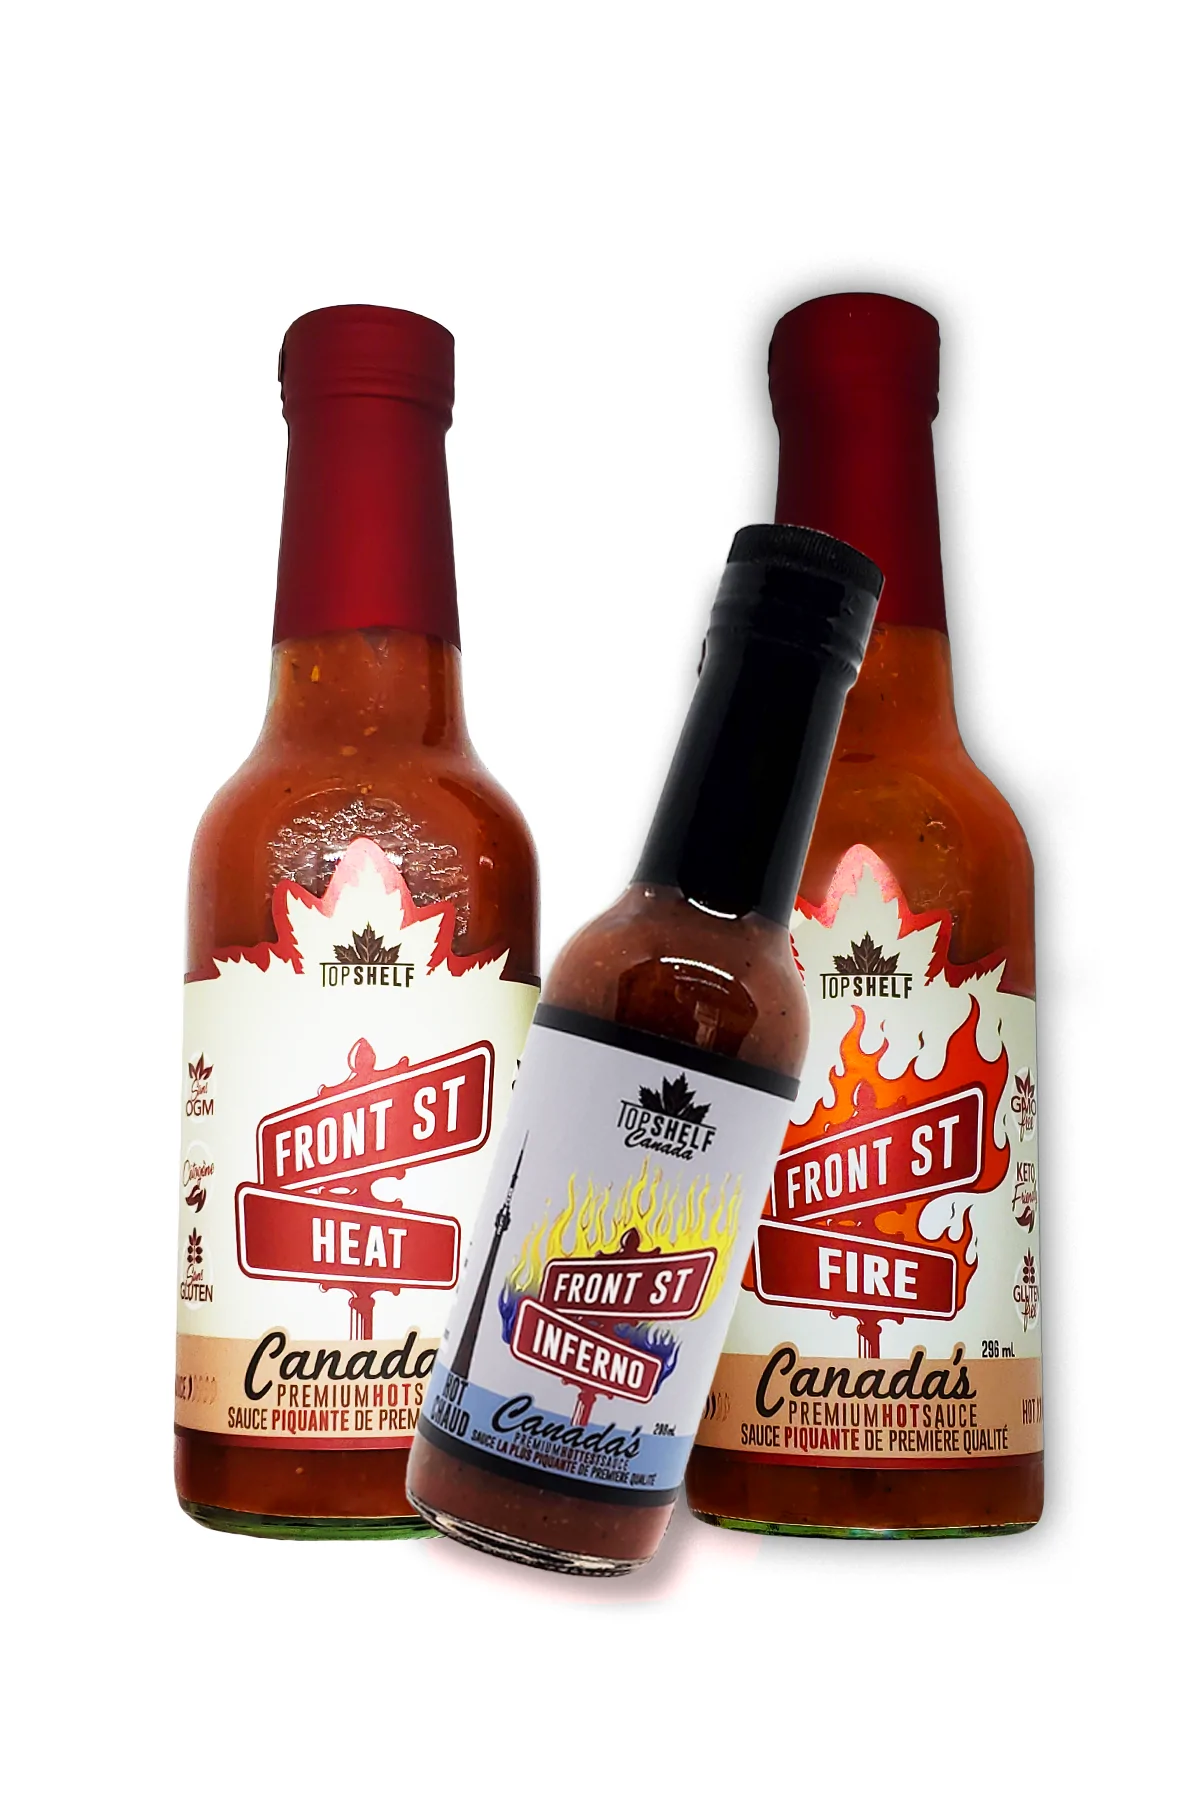 Gift pack of Top Shelf Canada hot sauce.